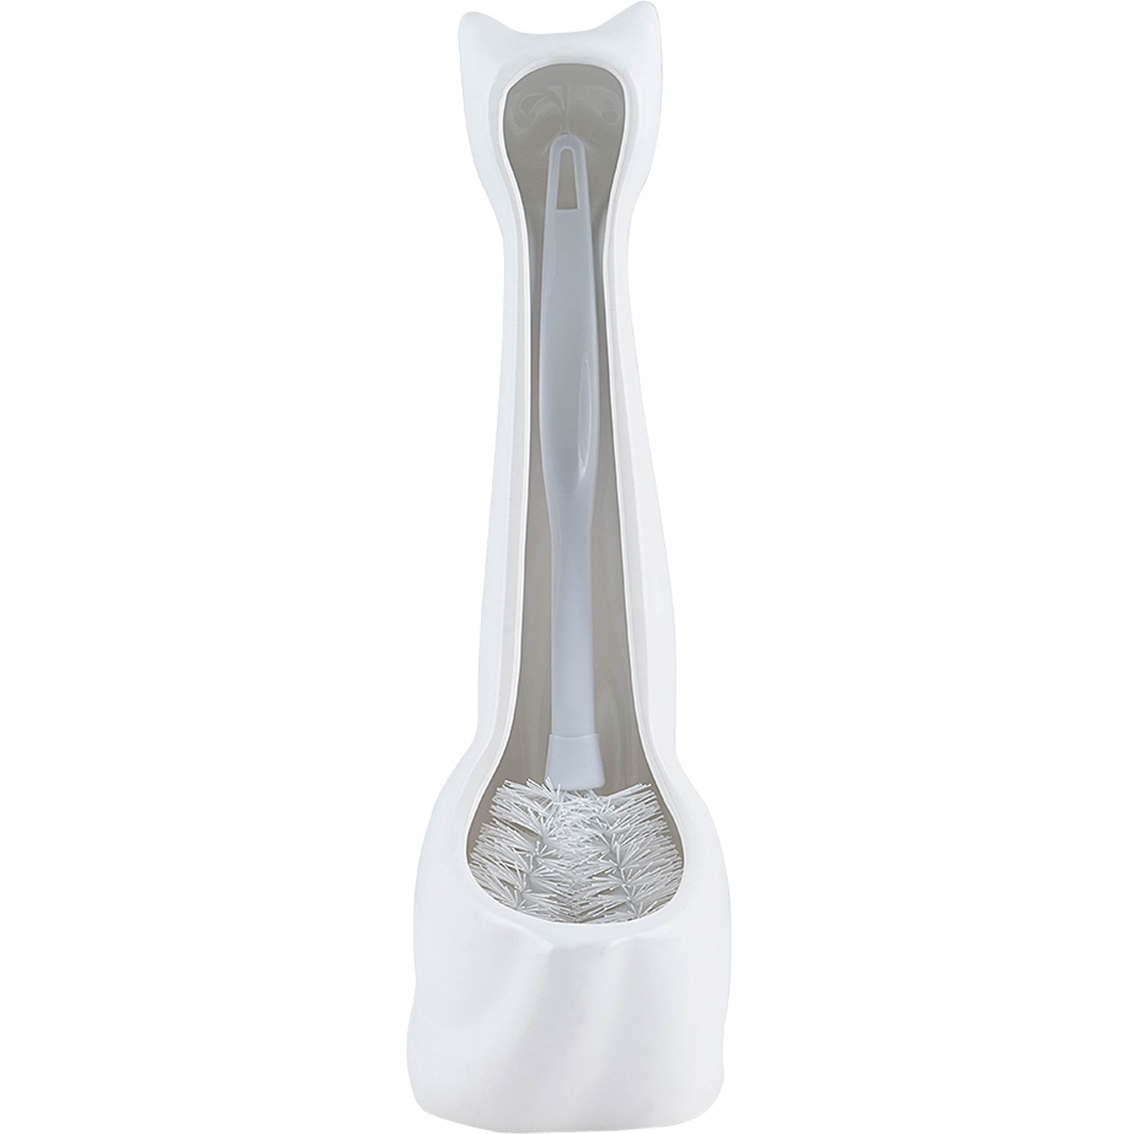 Allure 3 pc. Cat Toilet Brush Holder and Lotion Pump Set - Image 2 of 3